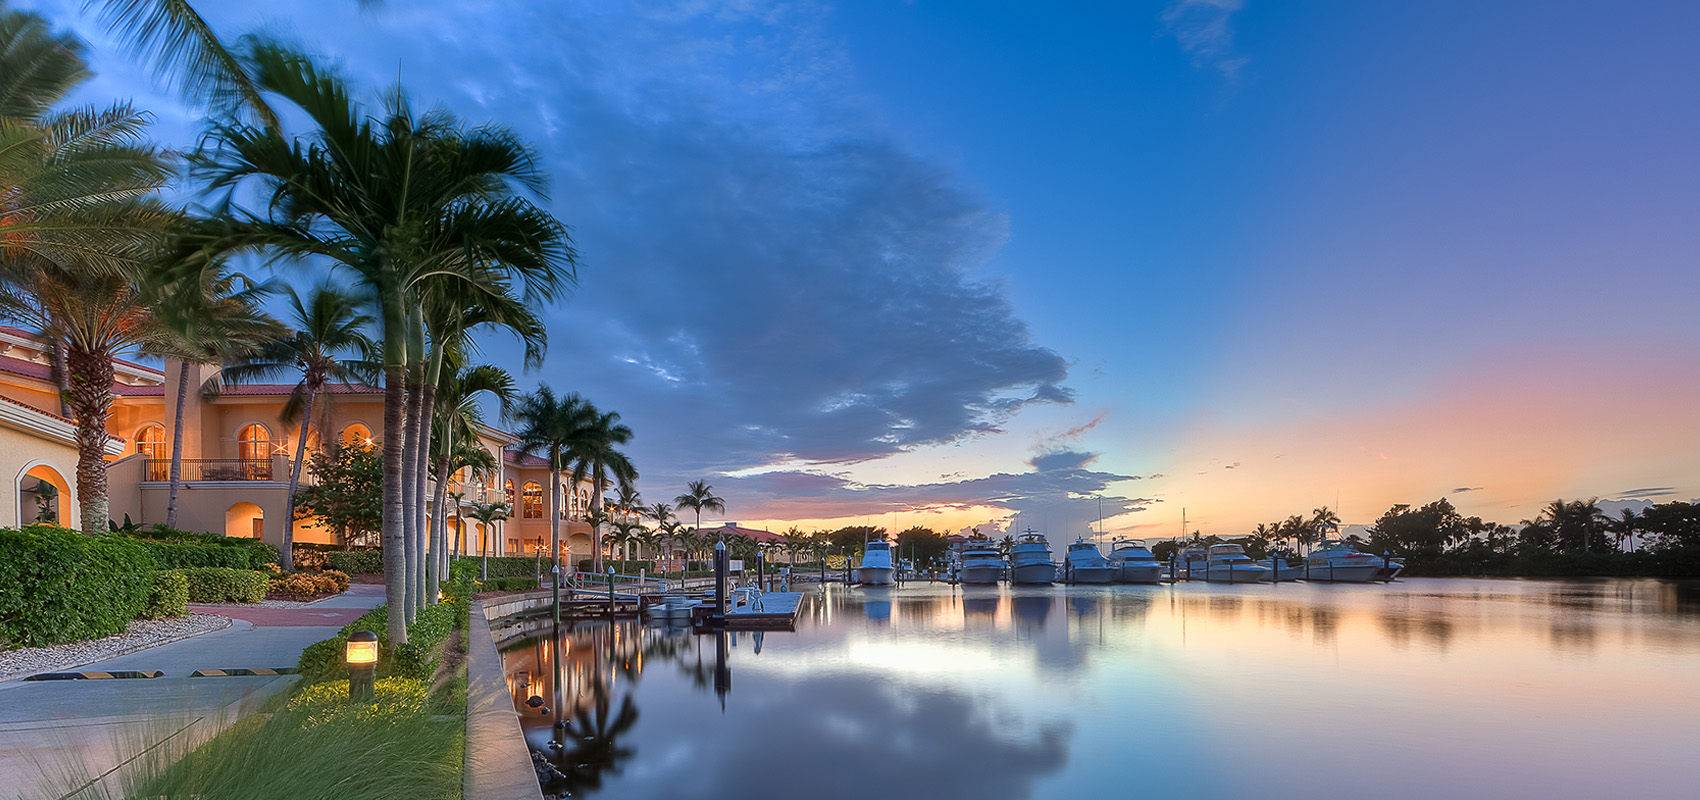 Gulf Harbour Marina in Fort Myers, FL